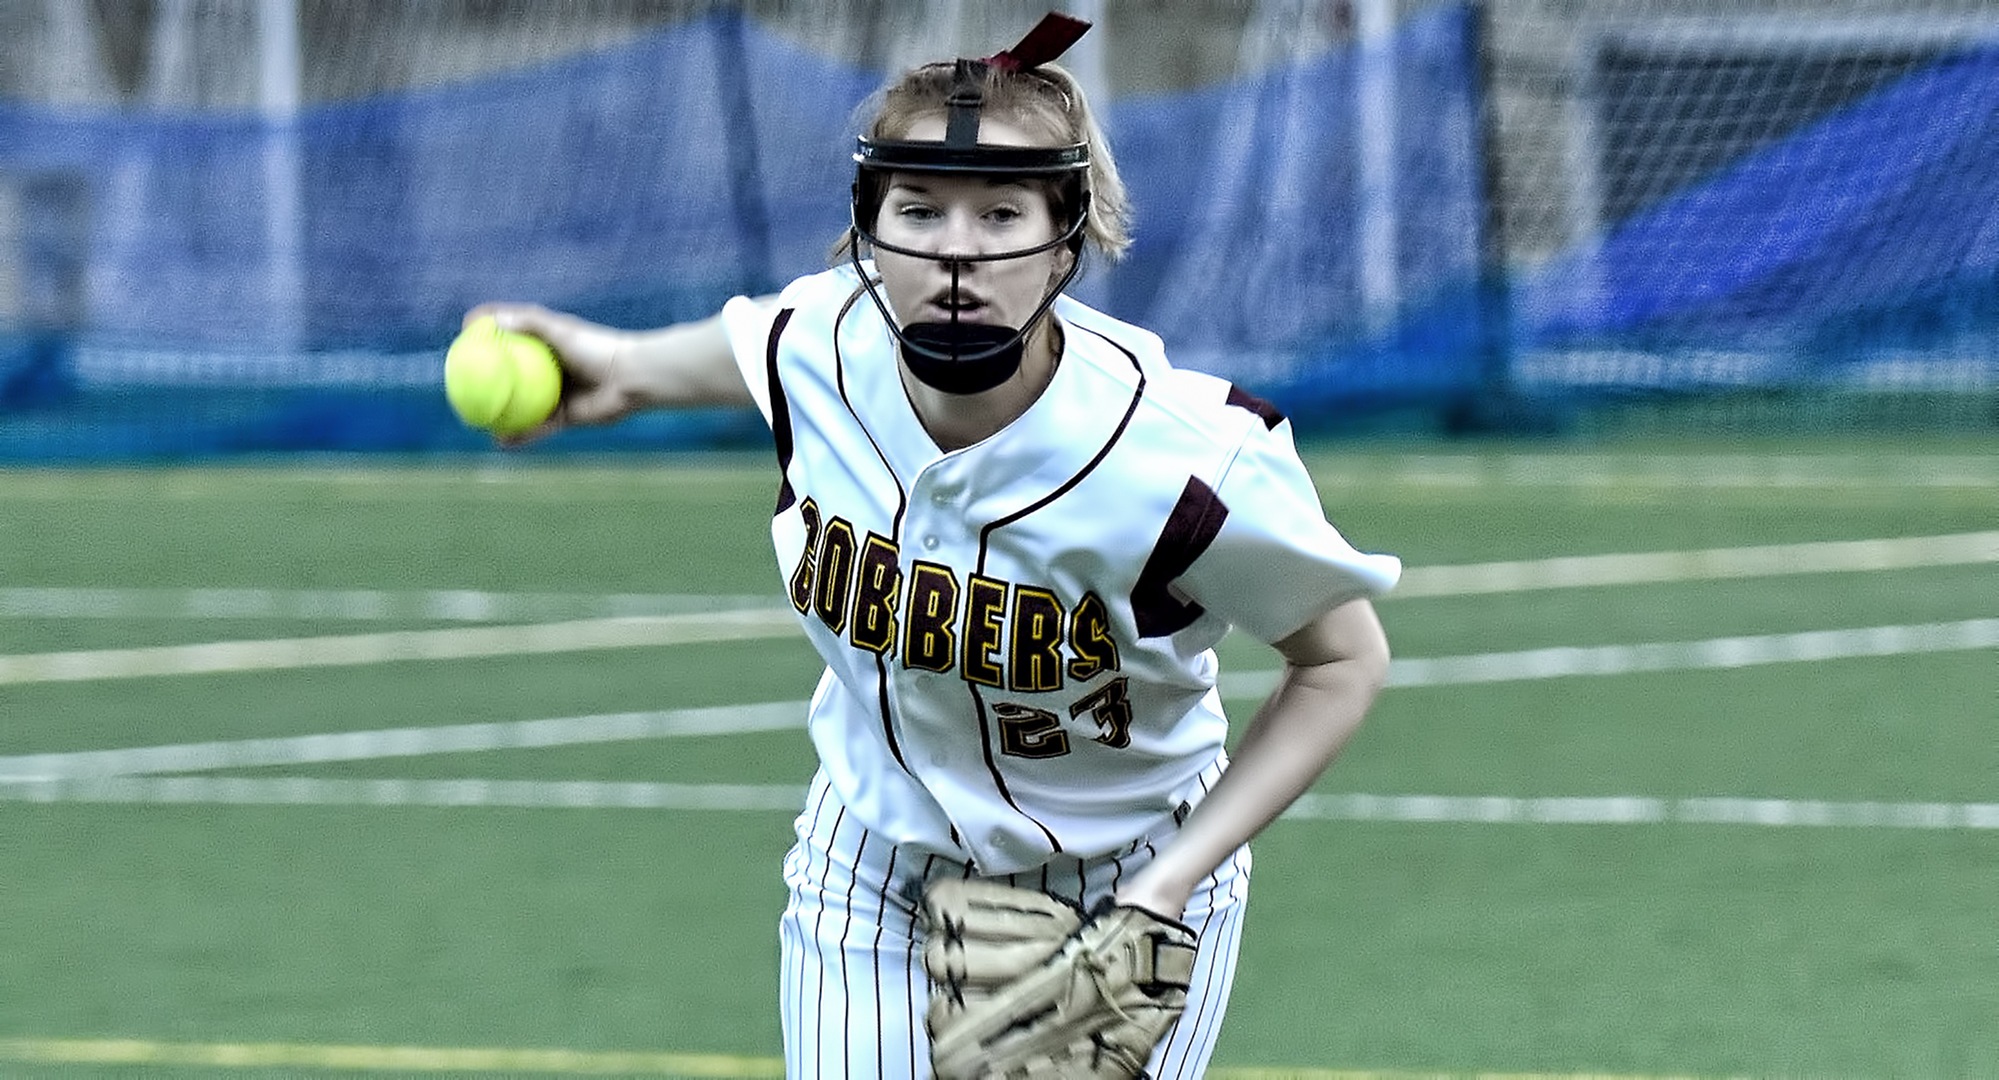 Sophomore pitcher Megan Gavin gets ready to deliver a pitch during the Cobbers' 2-1 win over Finlandia. She struck out 10 and earned her seventh win of the season.